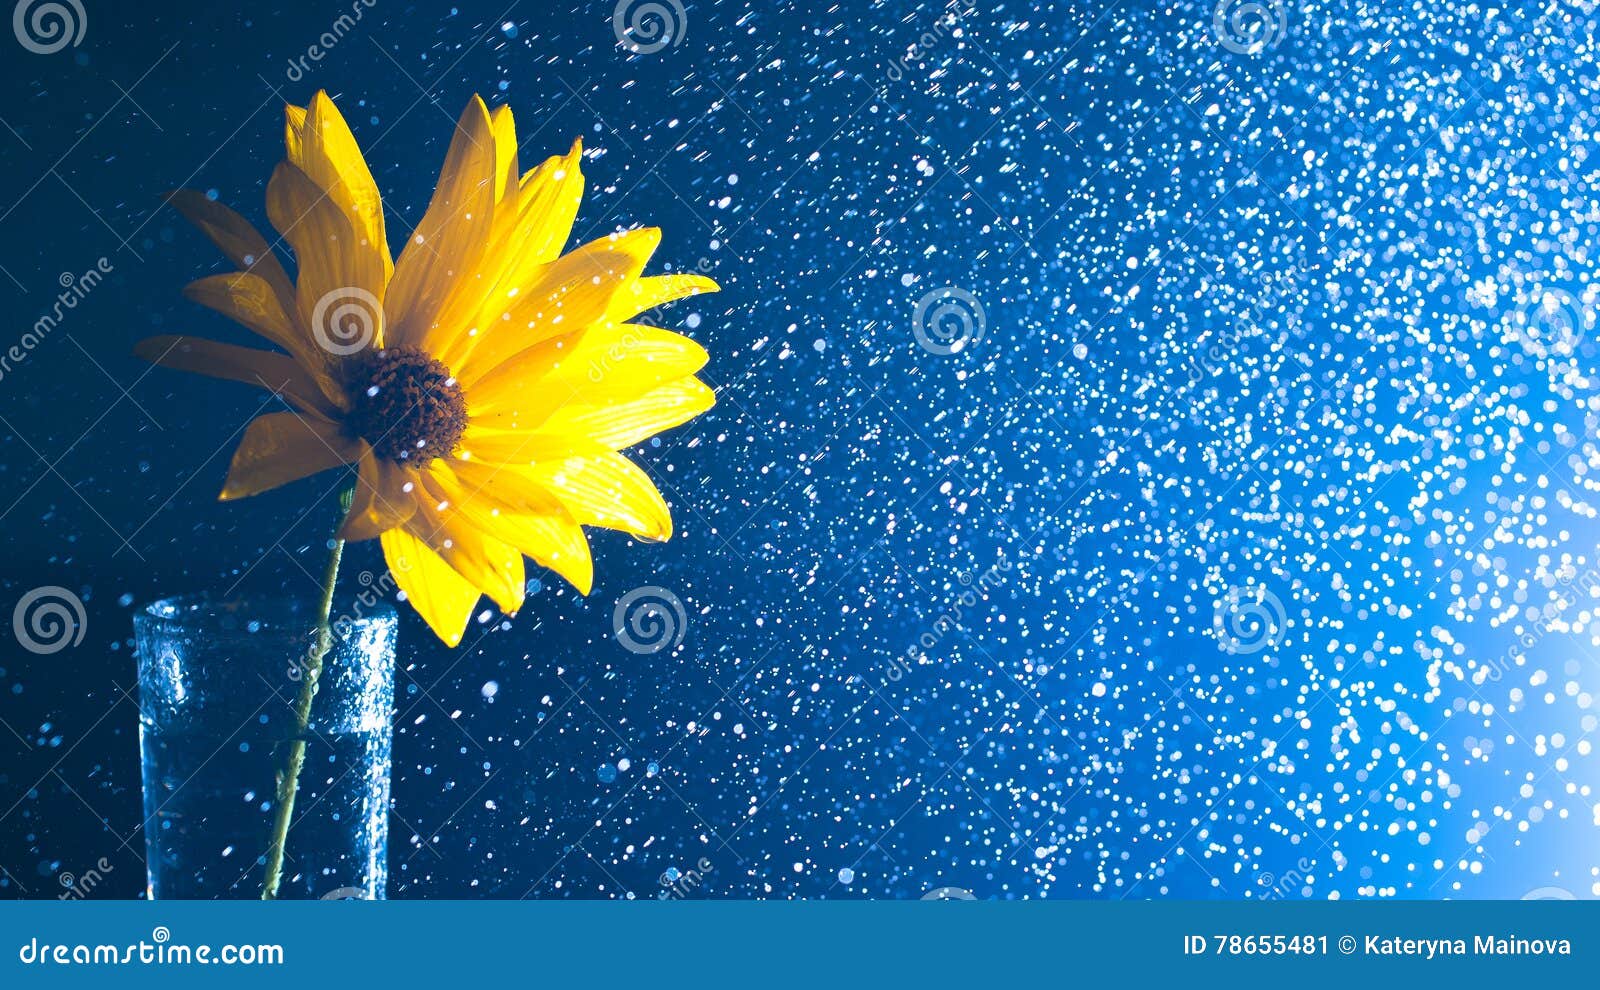 yellow wild flower in a glass vase with water spray contre on a dark background.